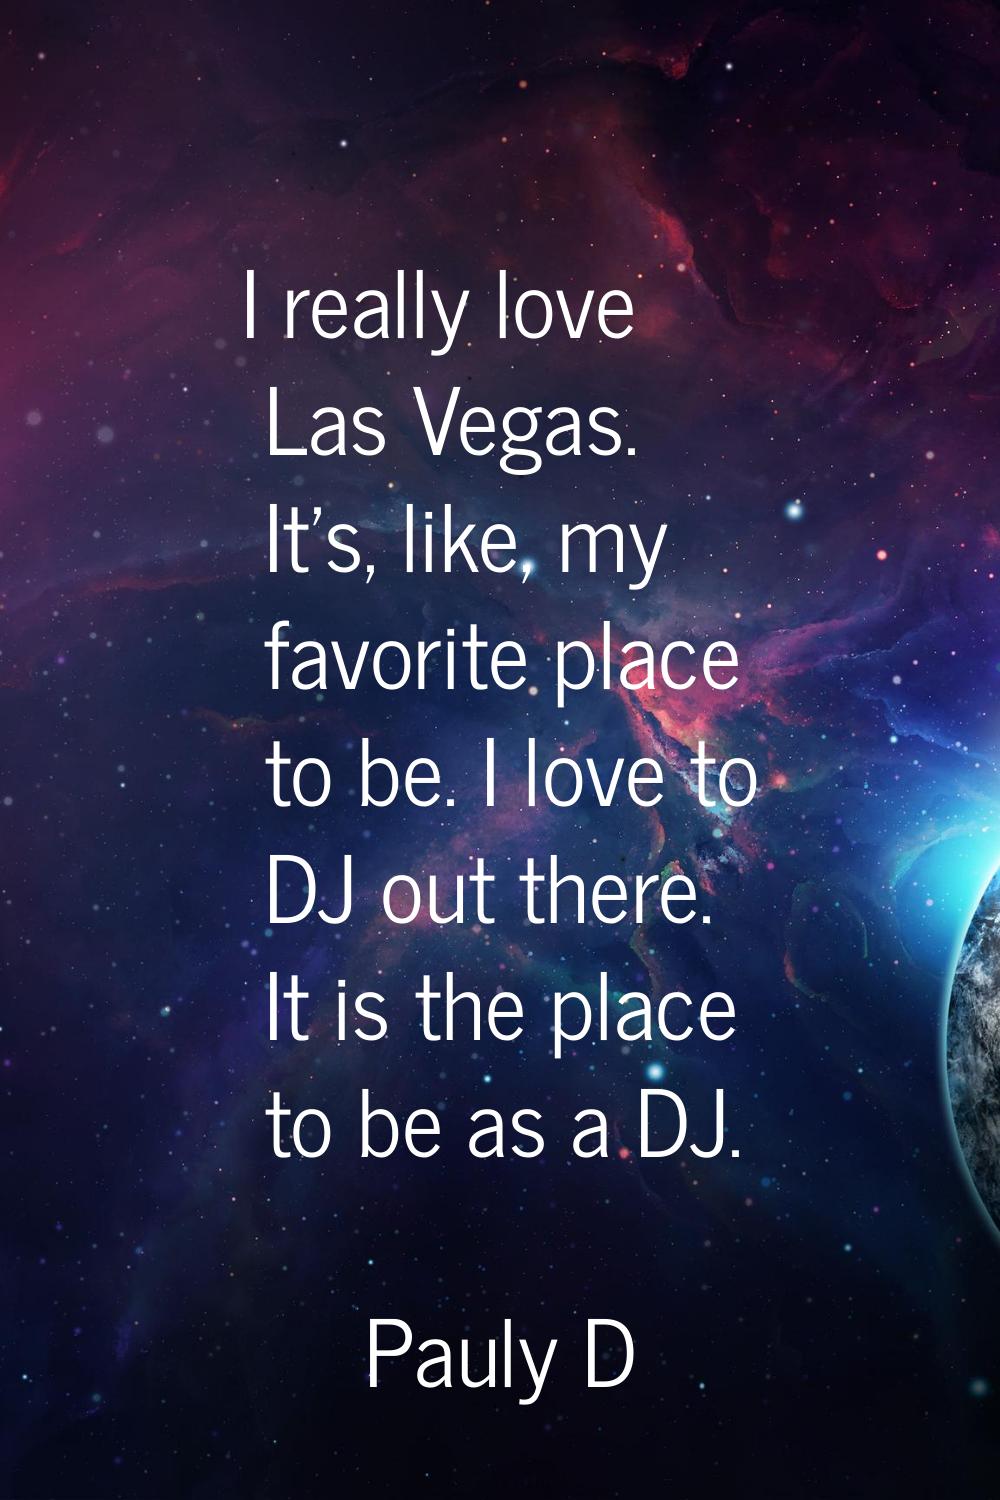 I really love Las Vegas. It's, like, my favorite place to be. I love to DJ out there. It is the pla